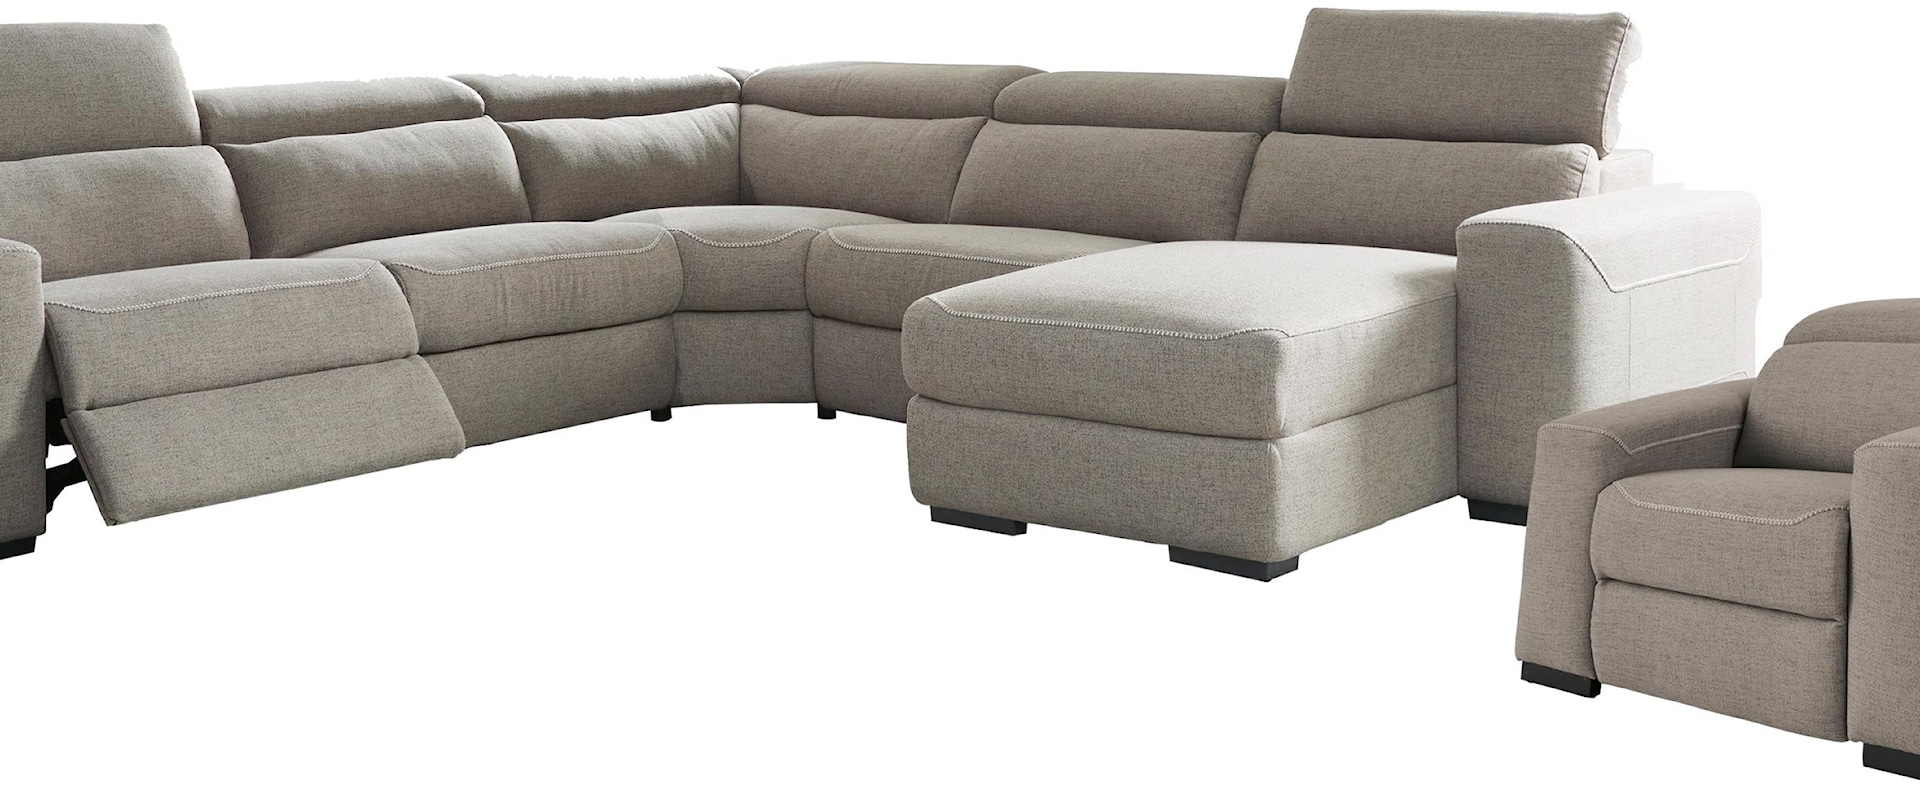 5 Piece Power Reclining Sectional Sofa Chaise  and Power Recliner Set